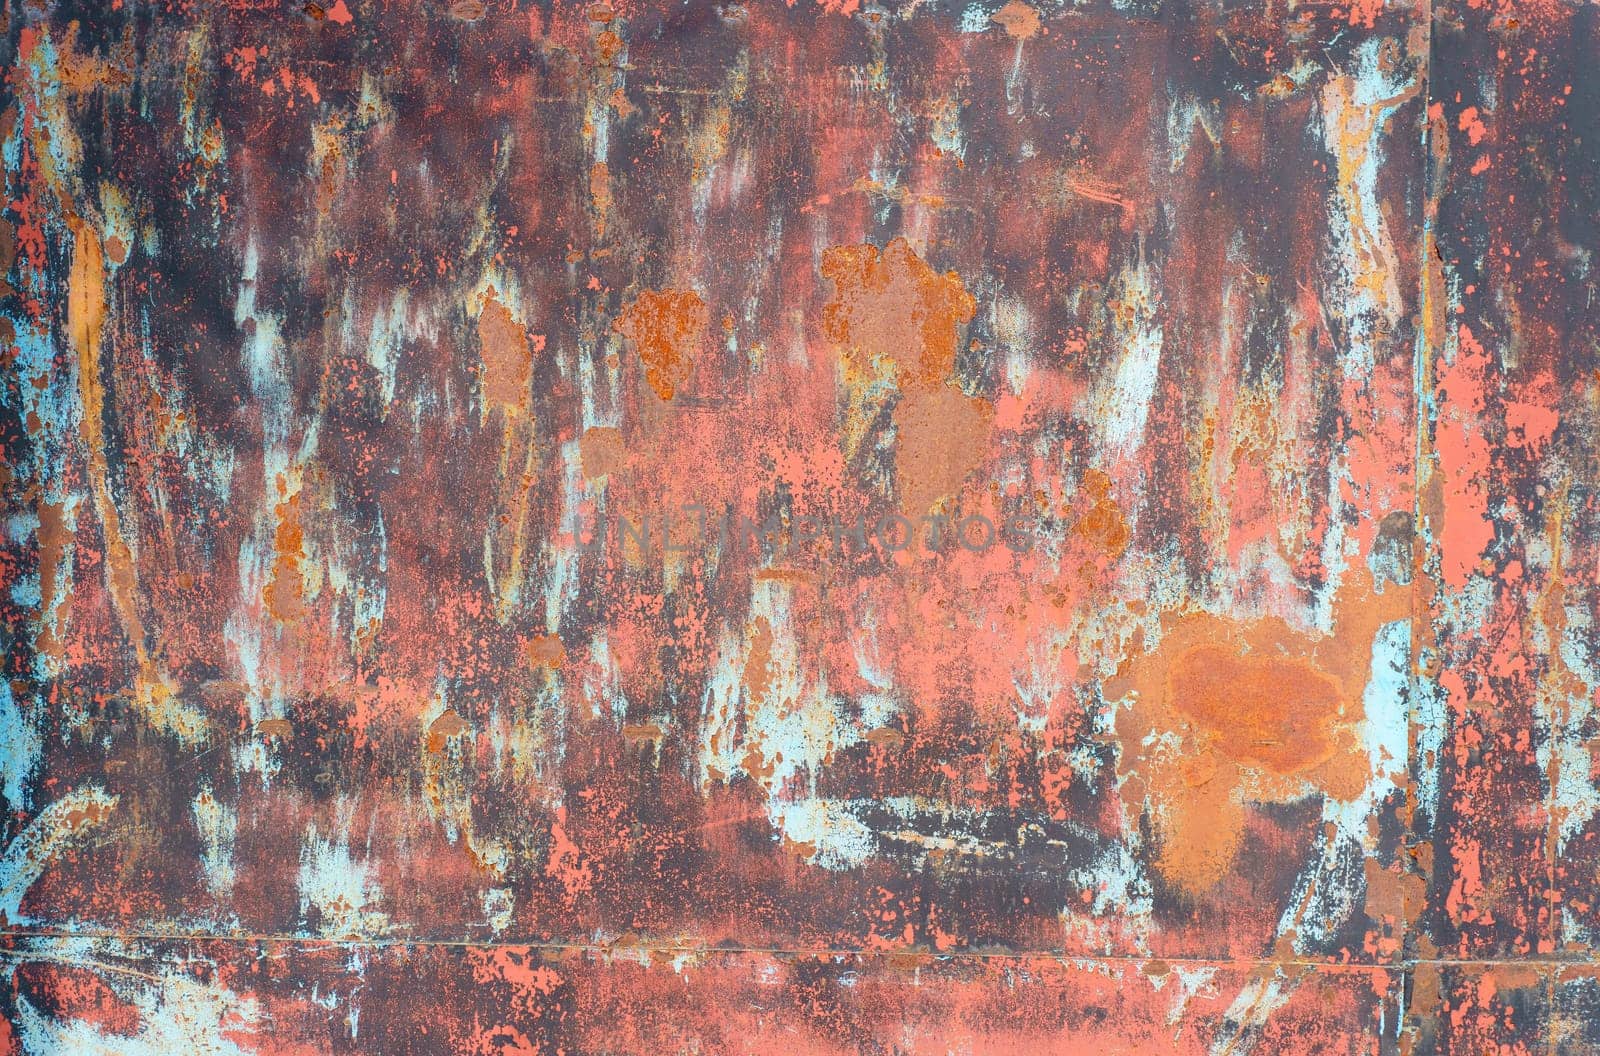 Texture of an old rusty metal sheet with red and gray paint elements. by Sd28DimoN_1976